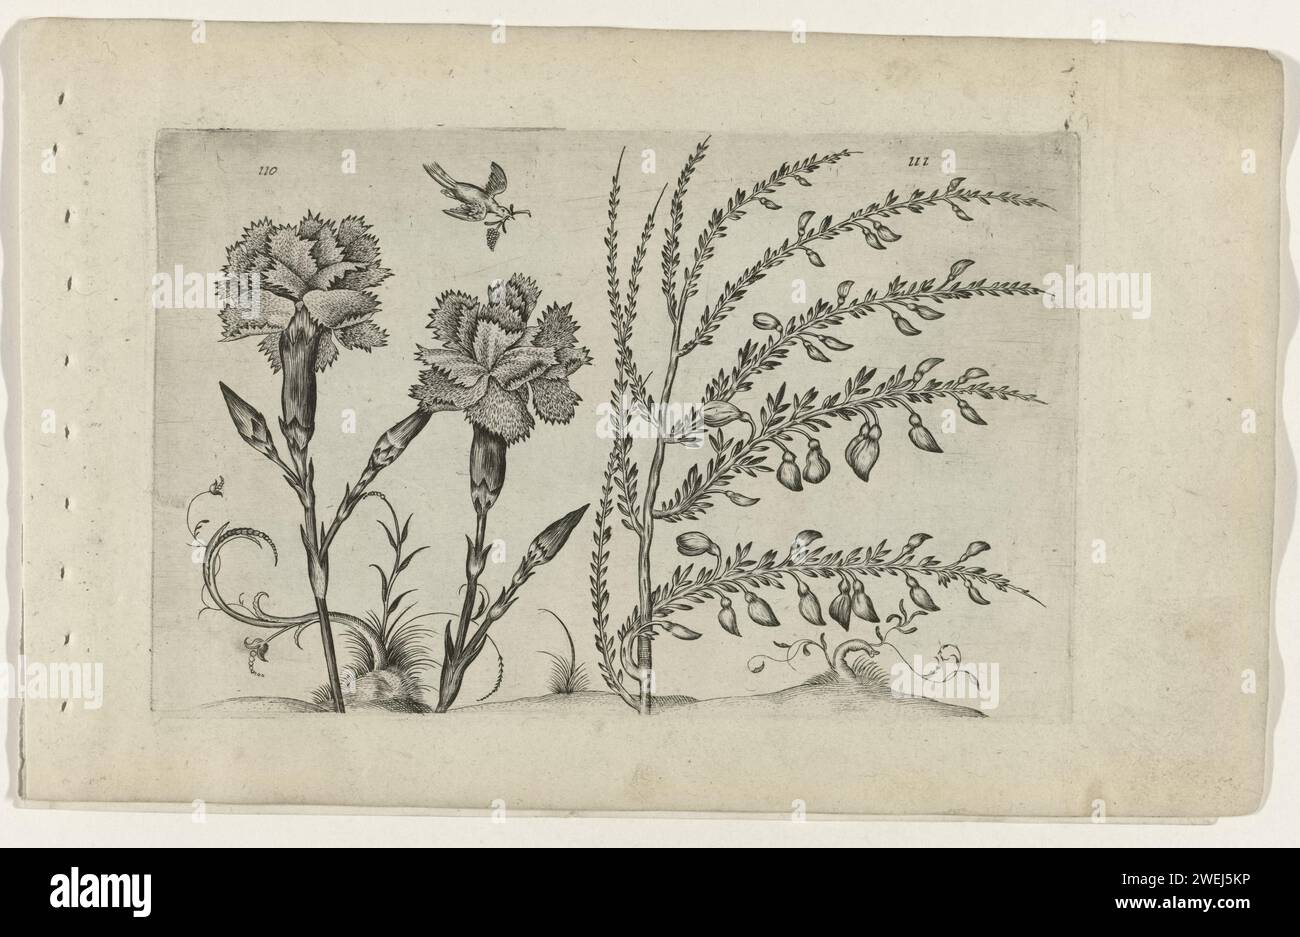 Tuinanjer and Brem, Crispijn van de Passe (I) (attributed to), after Crispijn van de Passe (i), 1600 - 1604 print Tuinanjer (Dianthus Caryophyllus) and Brem (Cytisus Scoparius), numbered 110 and 111. A pigeon above it.  paper engraving flowers: carnation. flowers: broom. botany Stock Photo